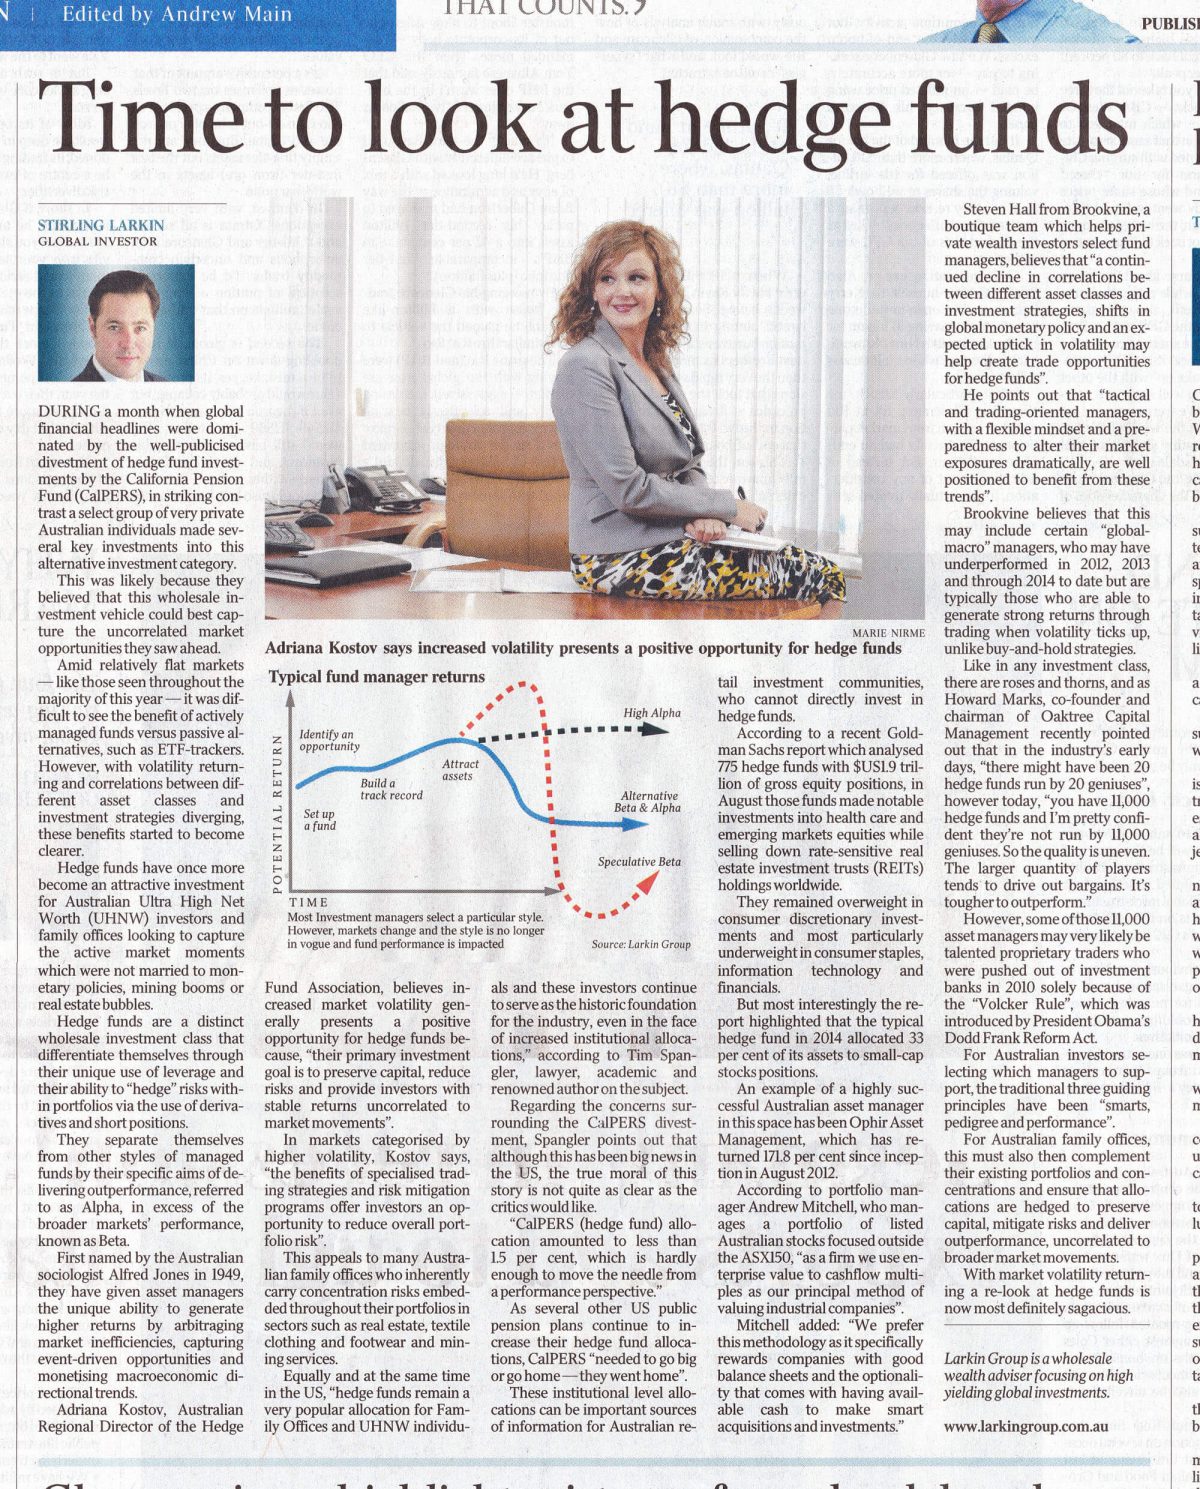 australian standfirst discusses hedge funds in 2014 in the australian newspaper